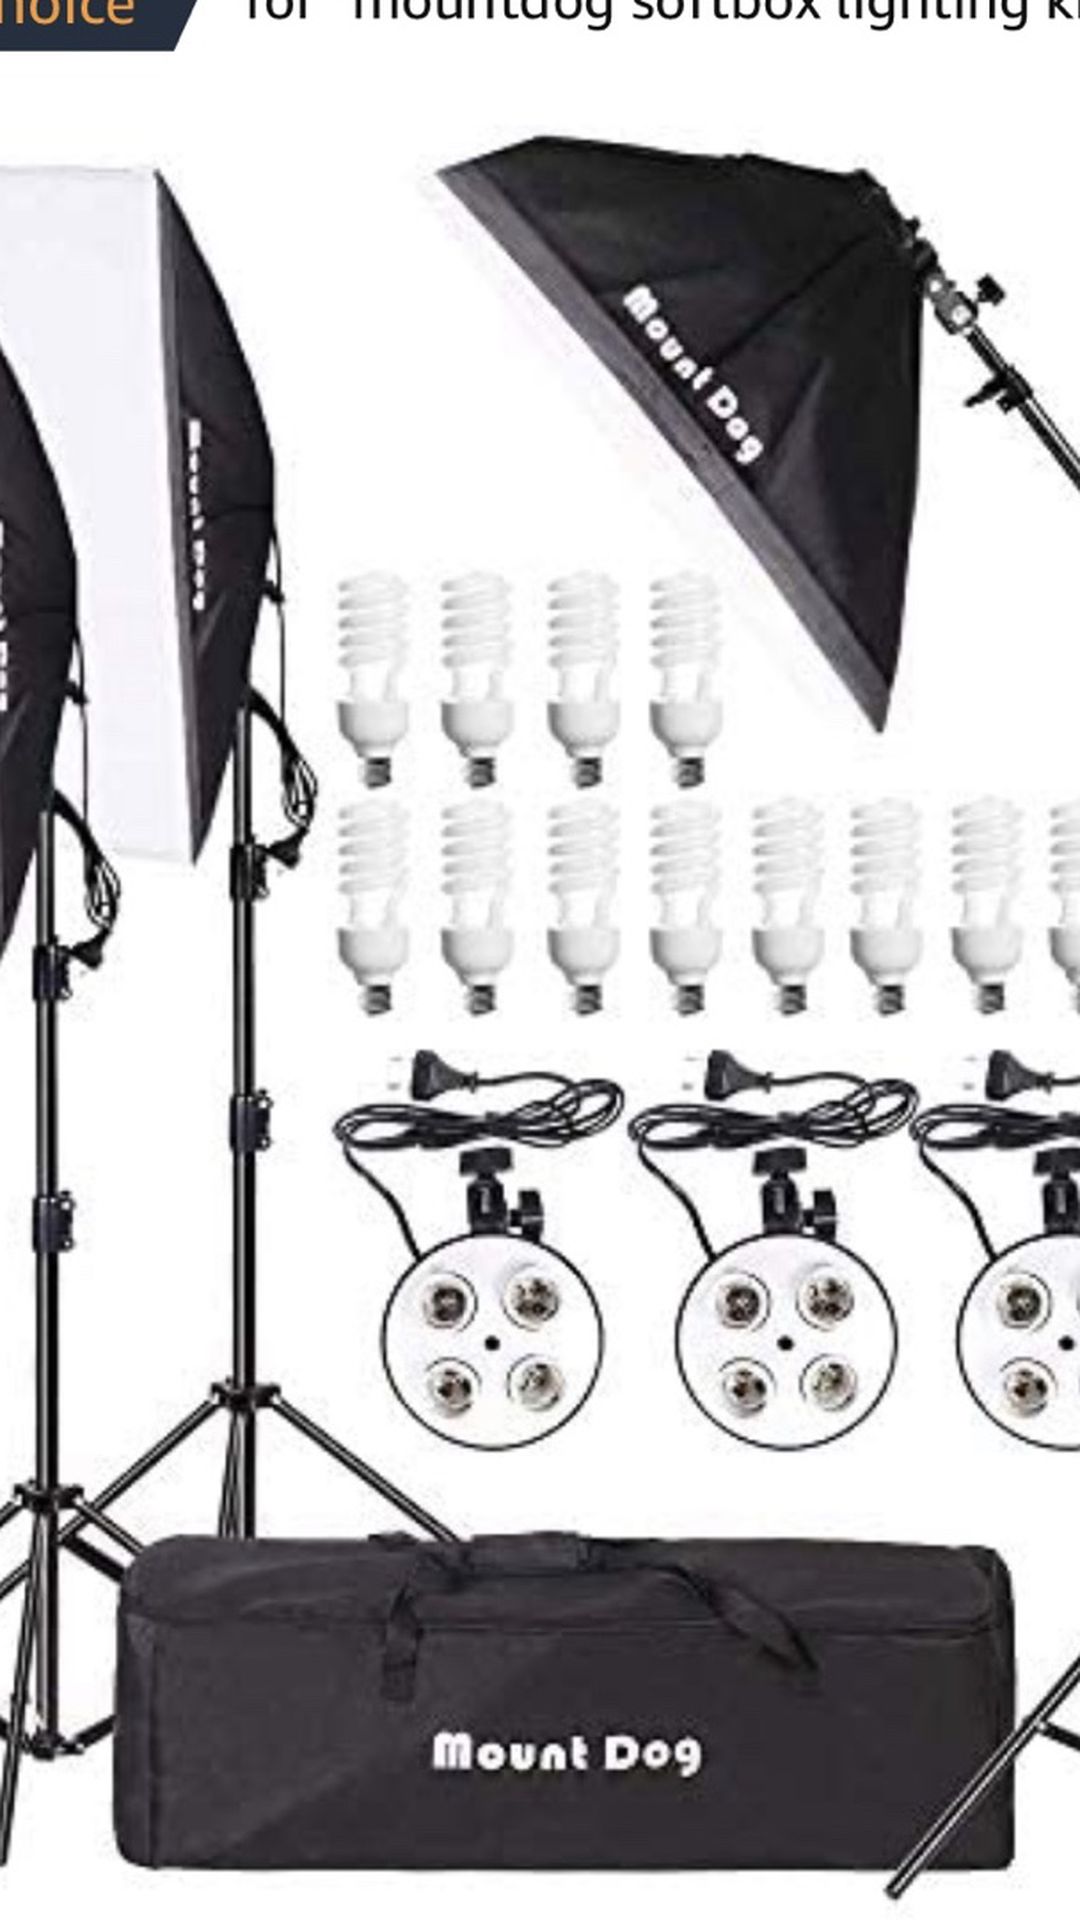 MOUNTDOG 2400W Softbox Photography Lighting Kit 20"x 28" Professional Continuous Studio Lighting Equipment with Boom Arm Hairlight and Carry Case for